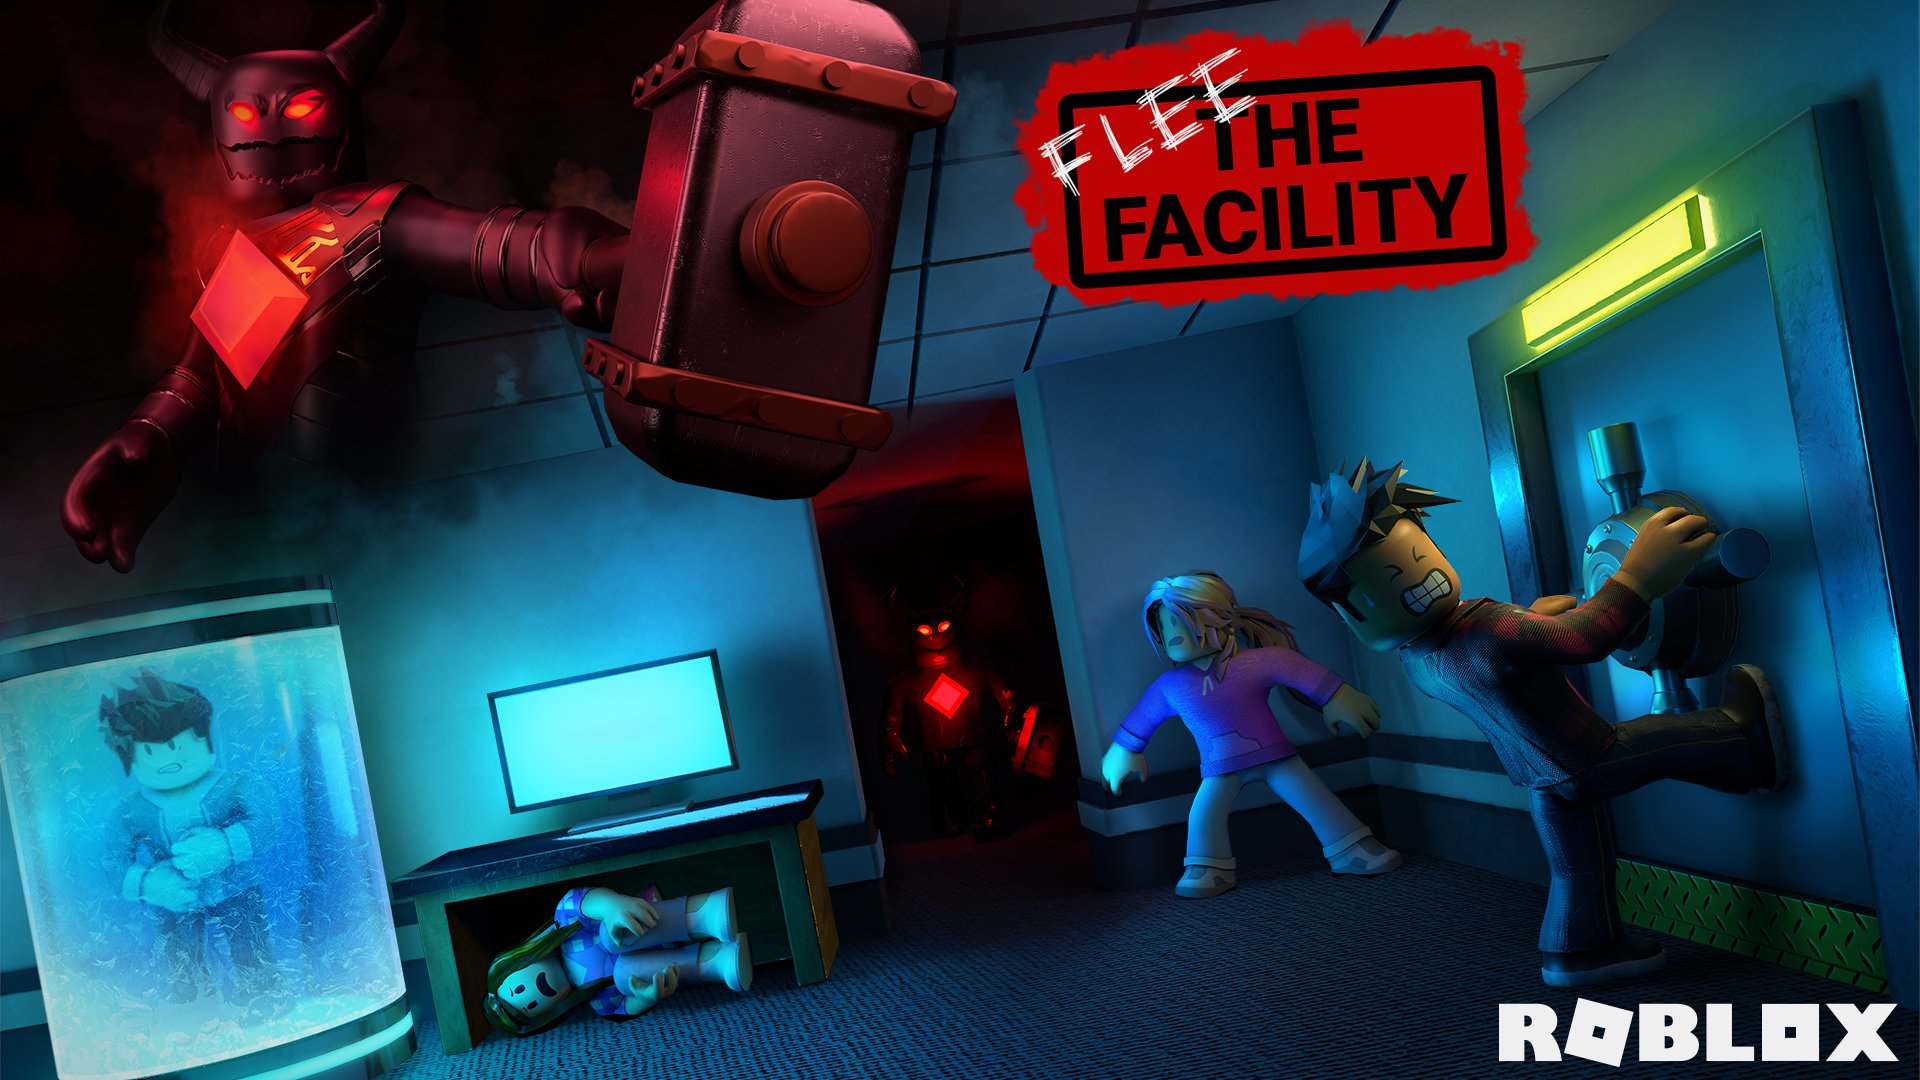 Andrew Mrwindy Willeitner On Twitter Just Uploaded Flee The Facility S Epic New Thumbnail Thanks Roblox For The Render - how to play the beast in 3rd person new roblox flee the facility